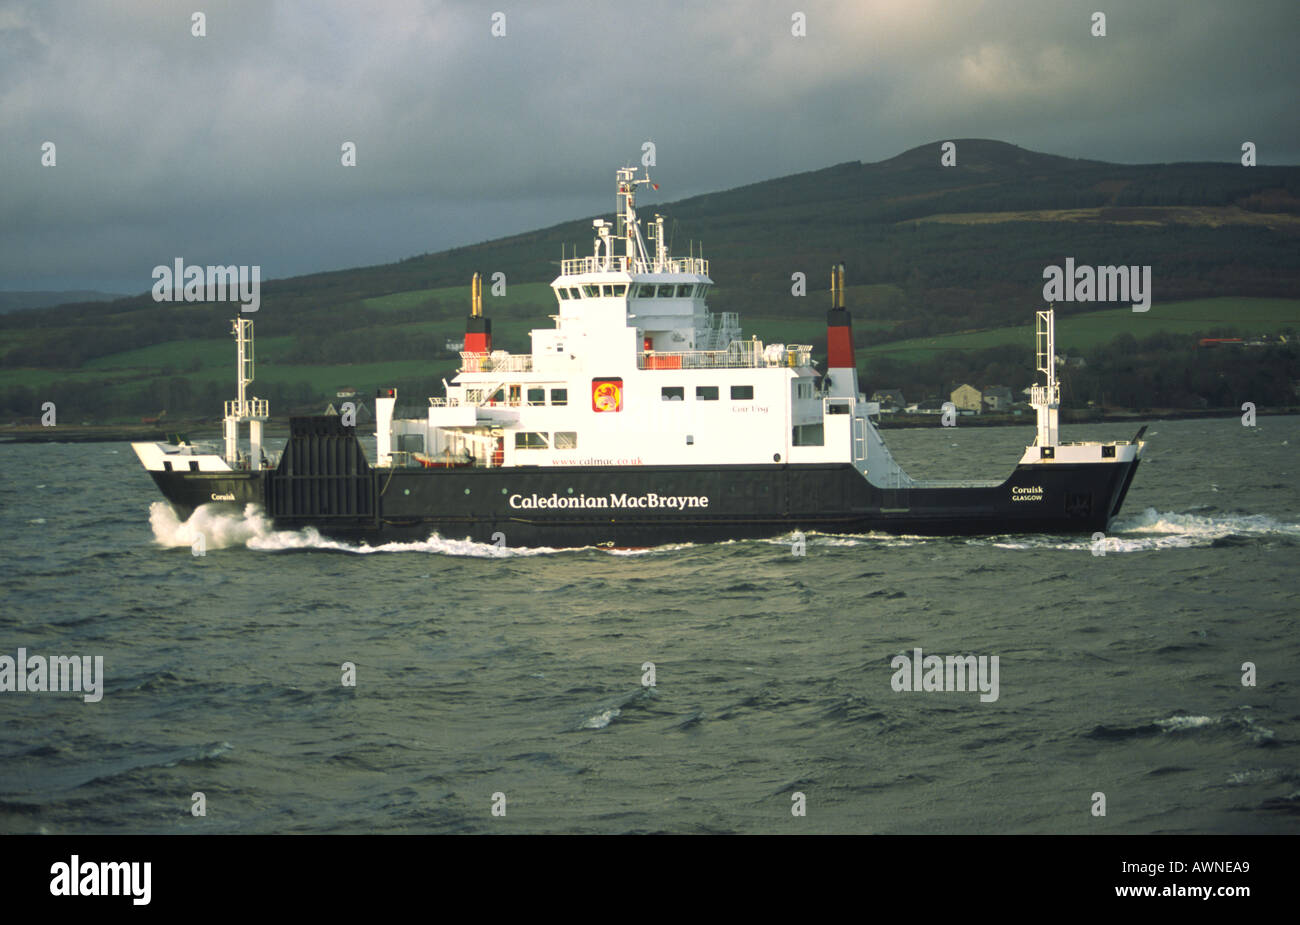 New Caledonian MacBrayne ferry Coruisk braving the weather and ploughing its way to Rothesay from Wemyss Bay in Scotland Stock Photo